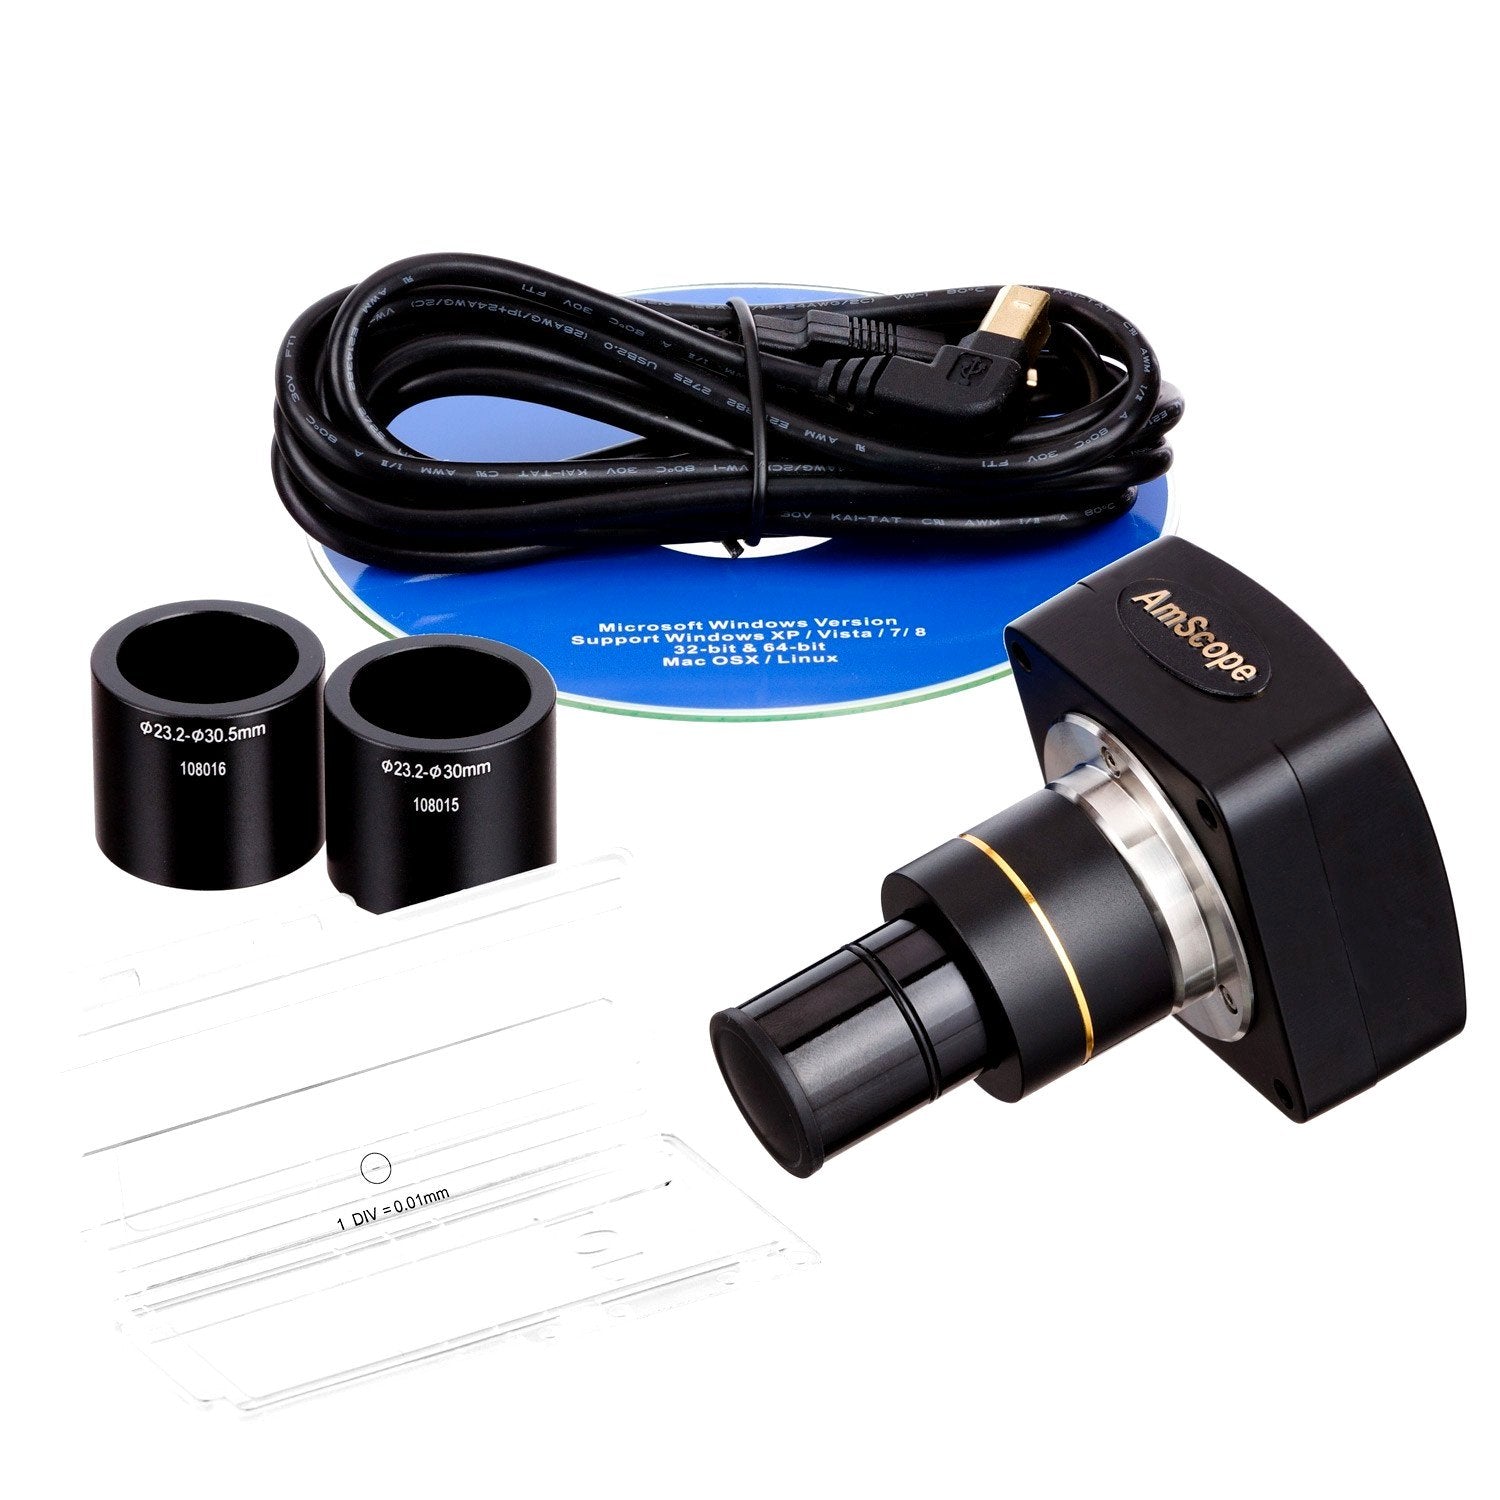 USB 2.0 Digital Cameras for Amscope C-Mount Microscopes with Reduction Lenses